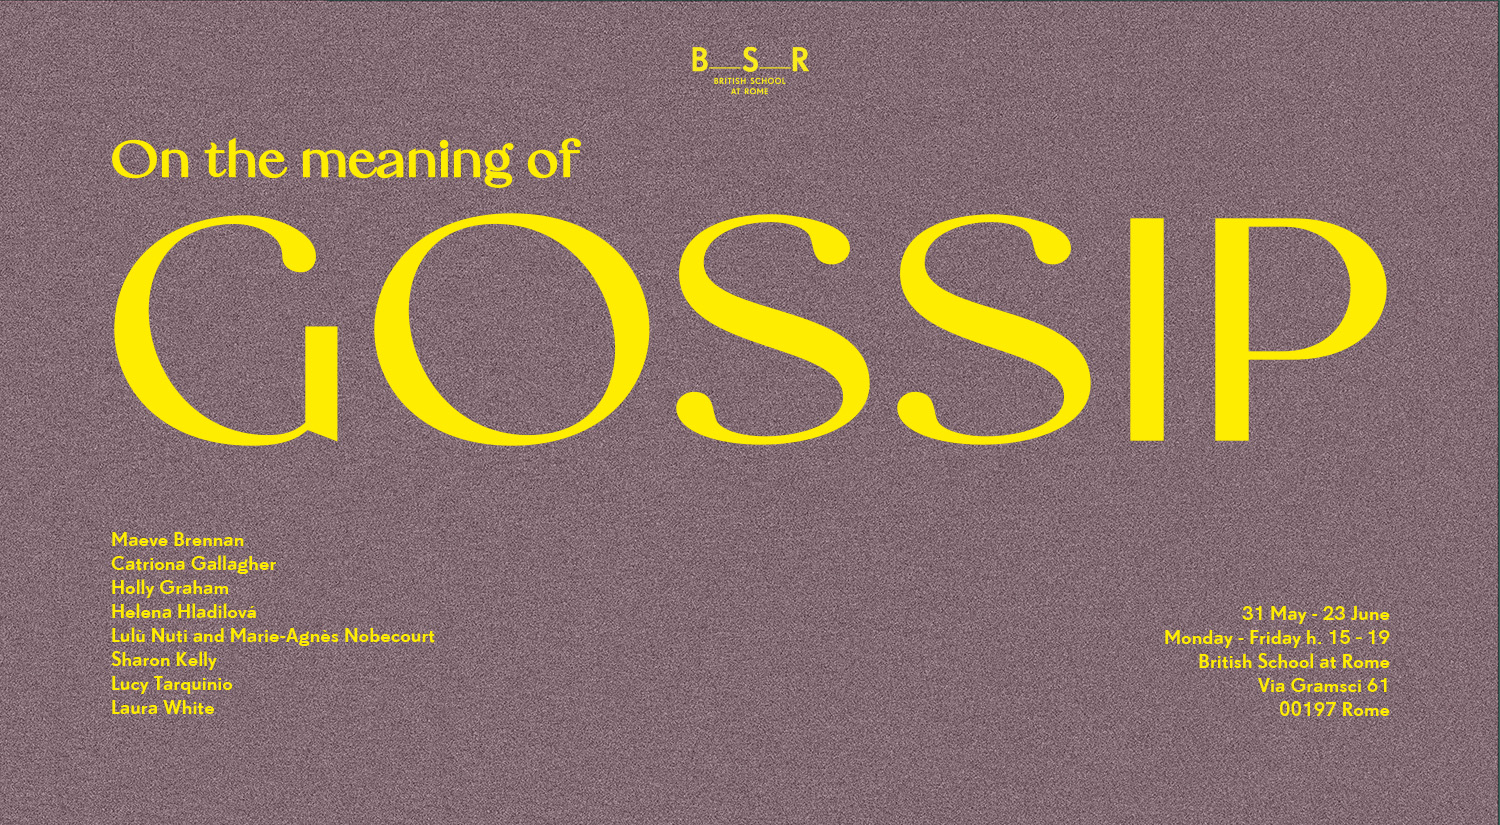 On the Meaning of Gossip